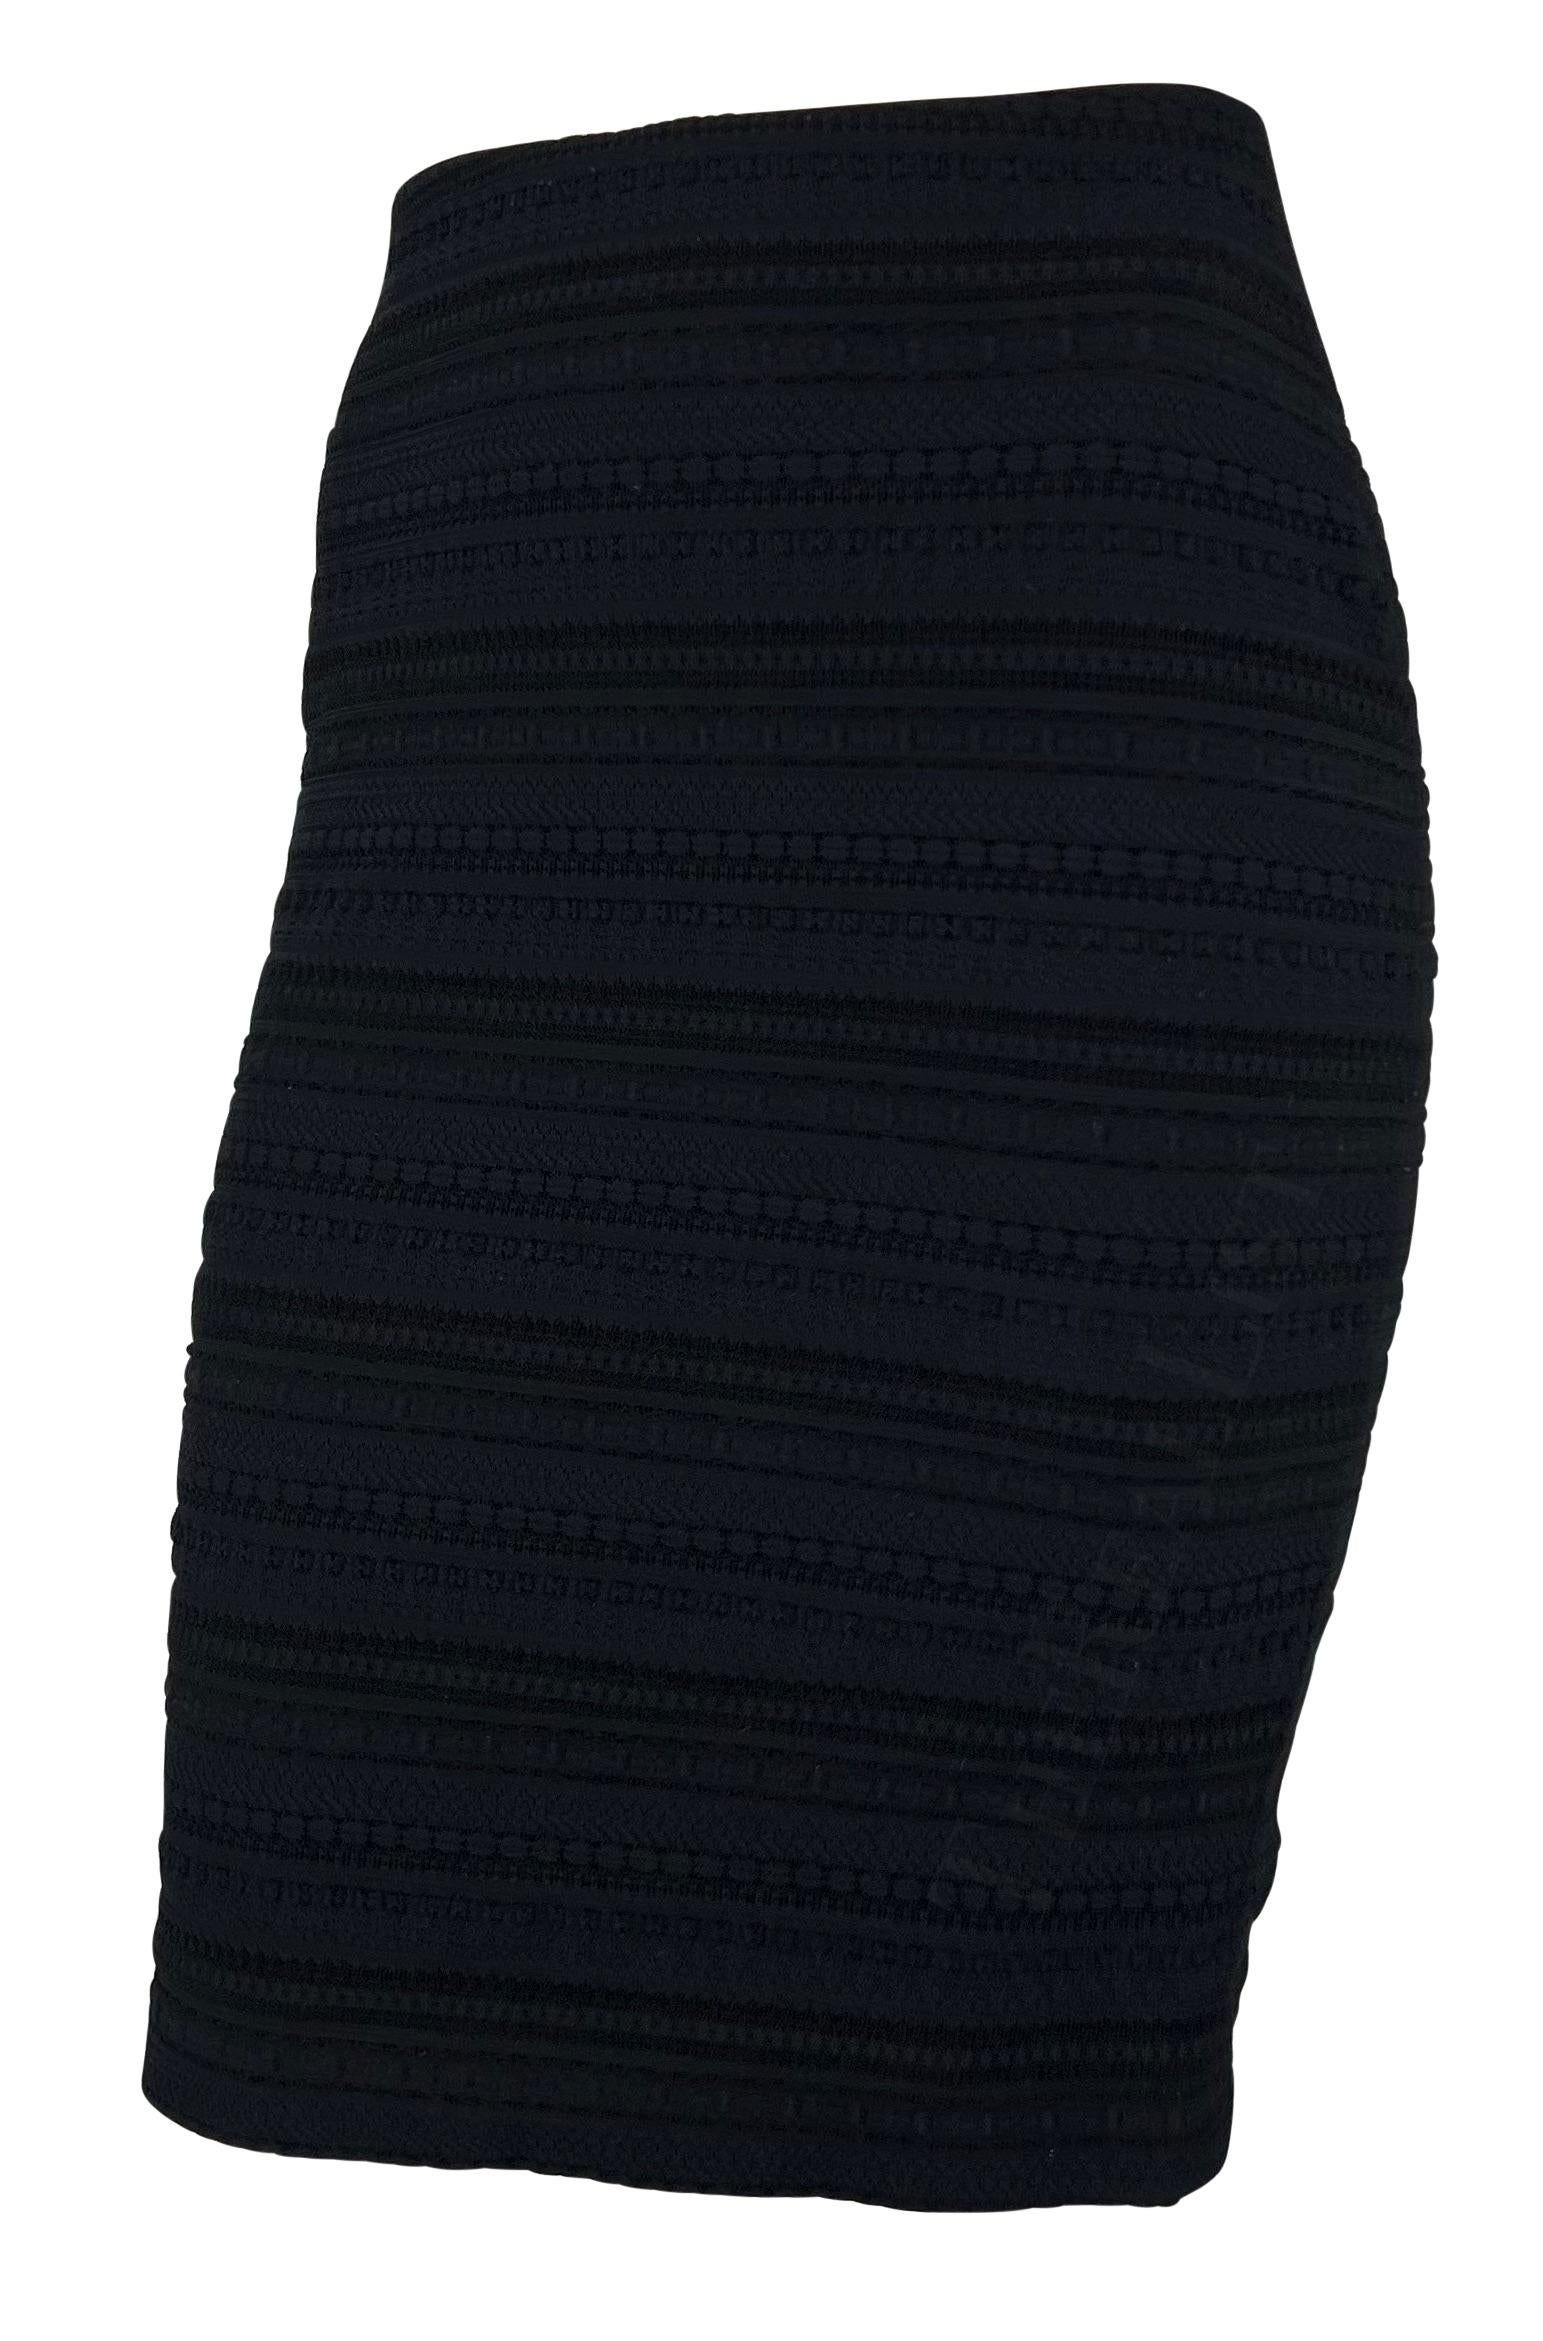 Presenting a fabulous navy blue woven Dolce & Gabbana pencil skirt. From the late 1990s, this high-waisted skirt features an intricate woven pattern and is made complete with a small slit at the back. 

Approximate measurements:
Size -